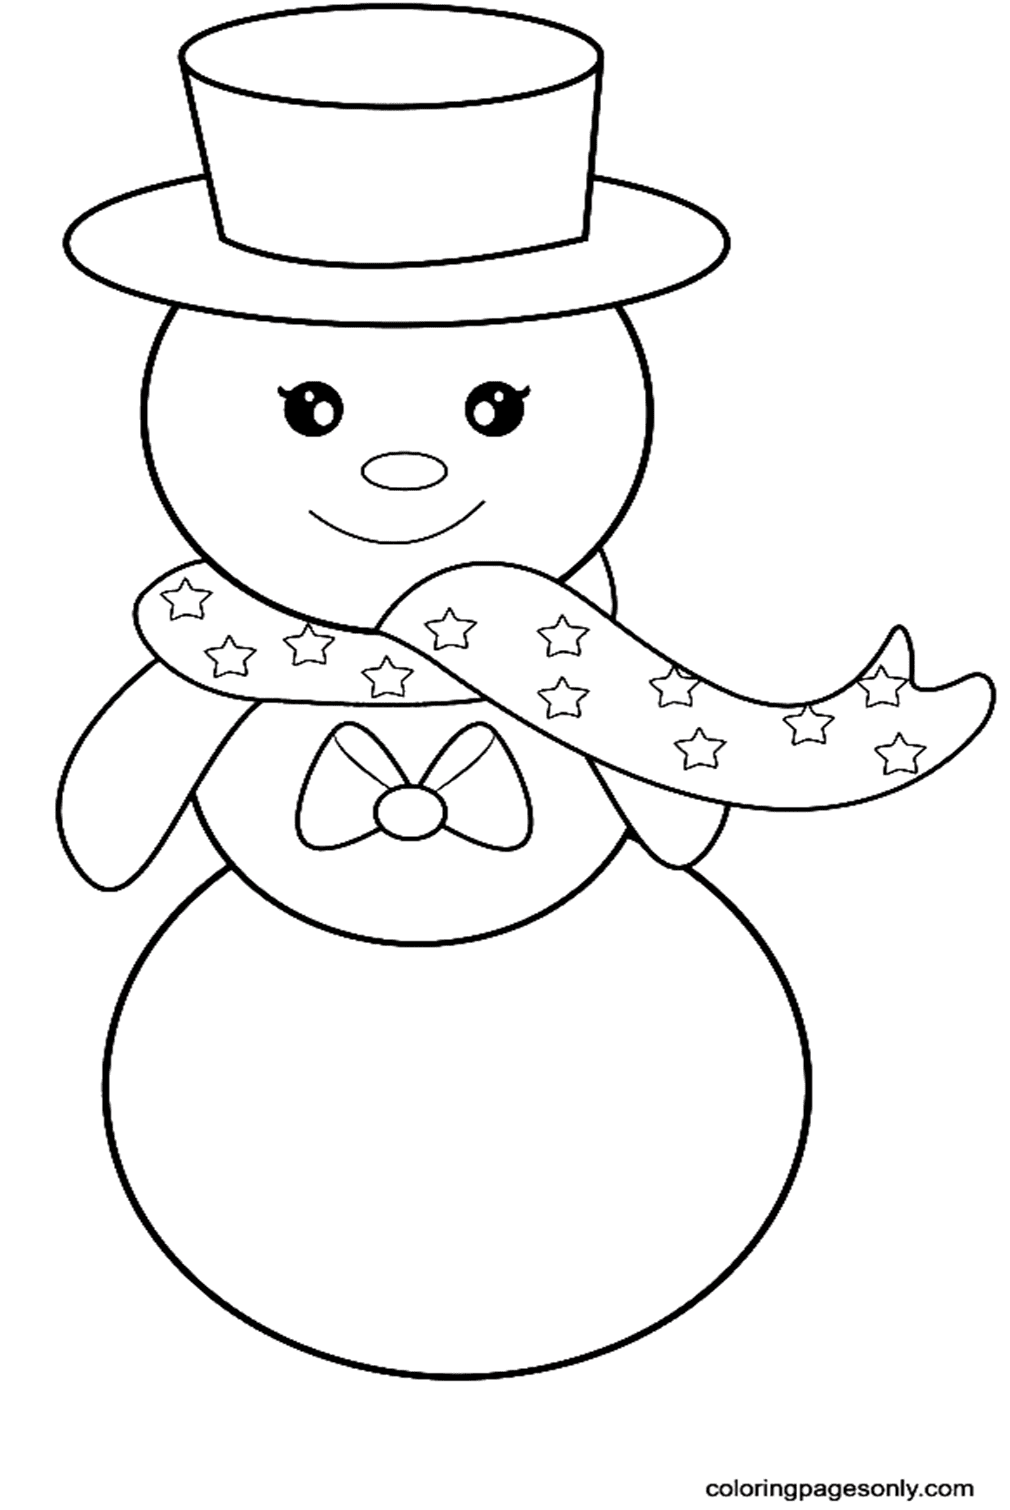 Snowman Wearing A Hat And Smiling Coloring Pages